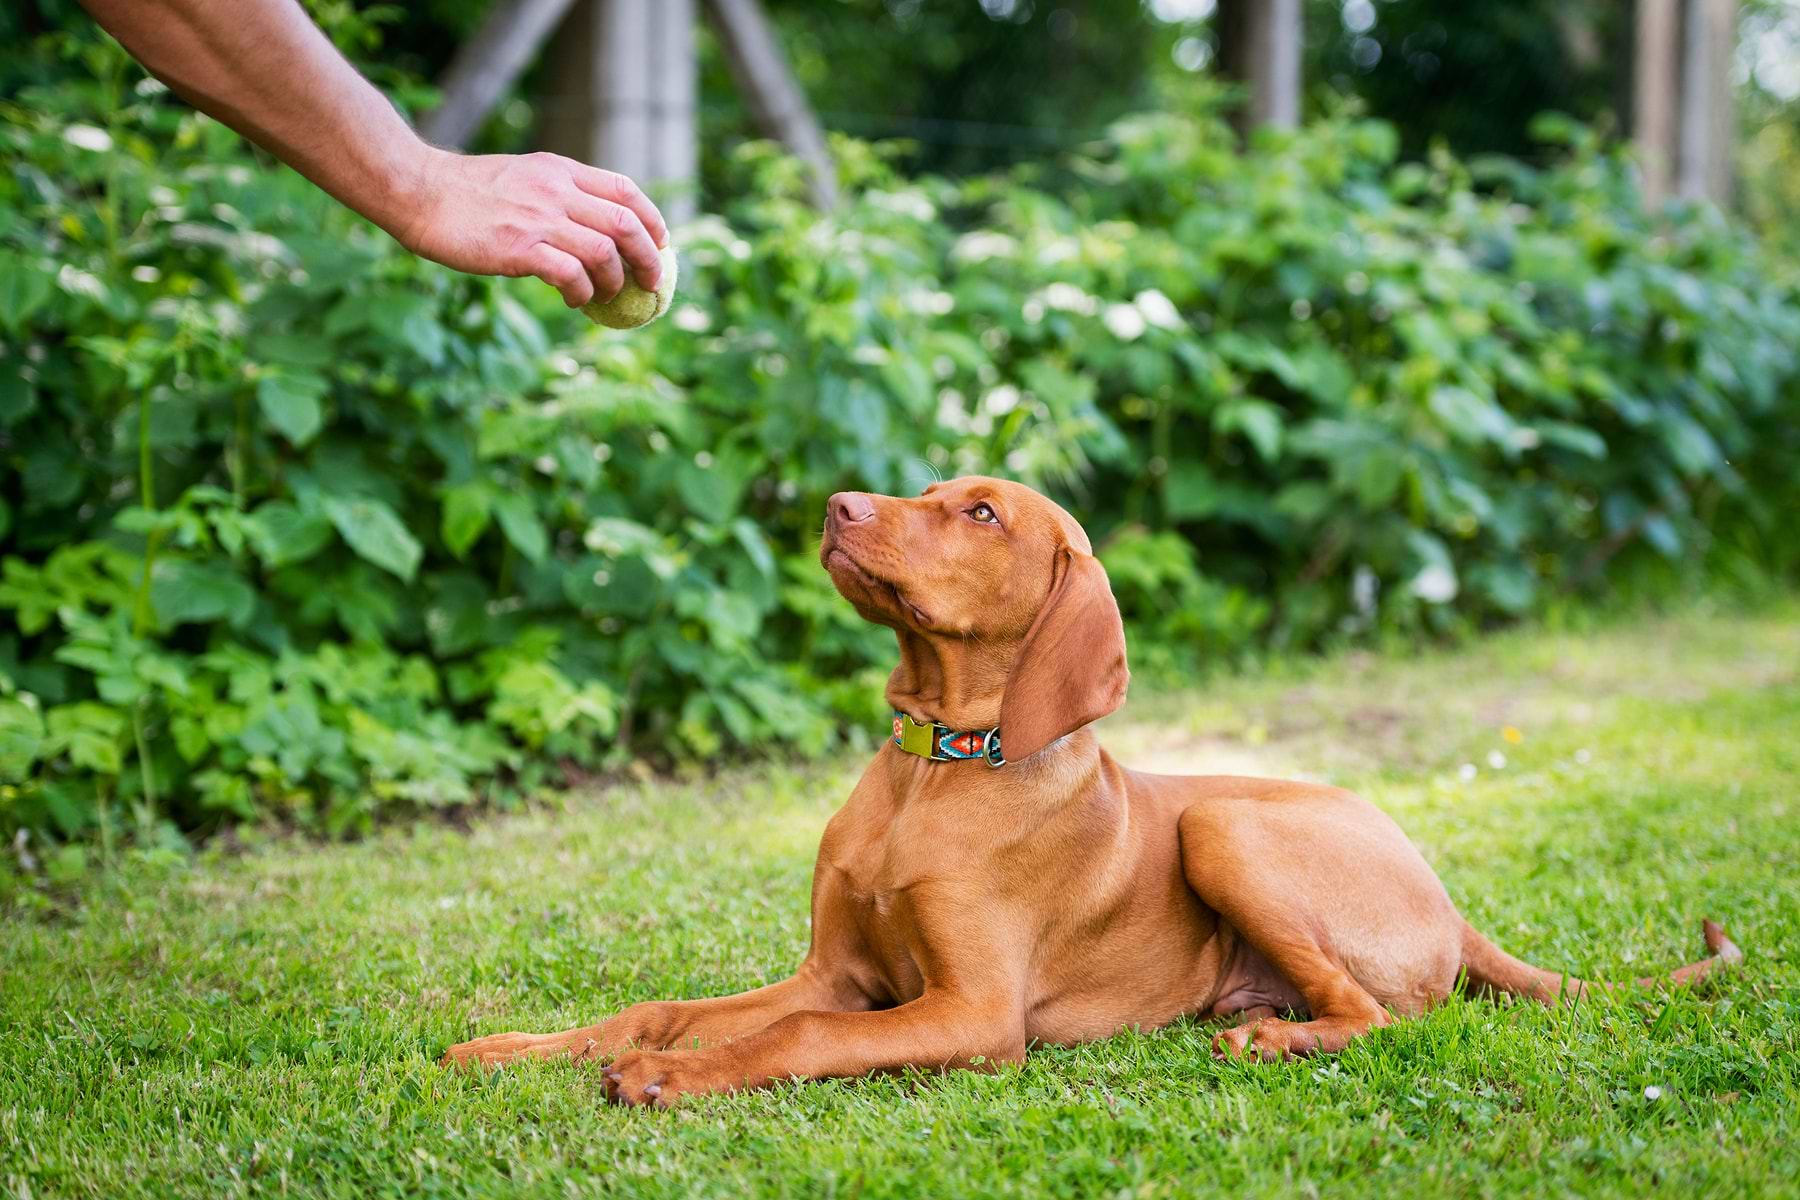 In an outdoor setup, a dog lying on the grass looking at the ball in a person's hand.